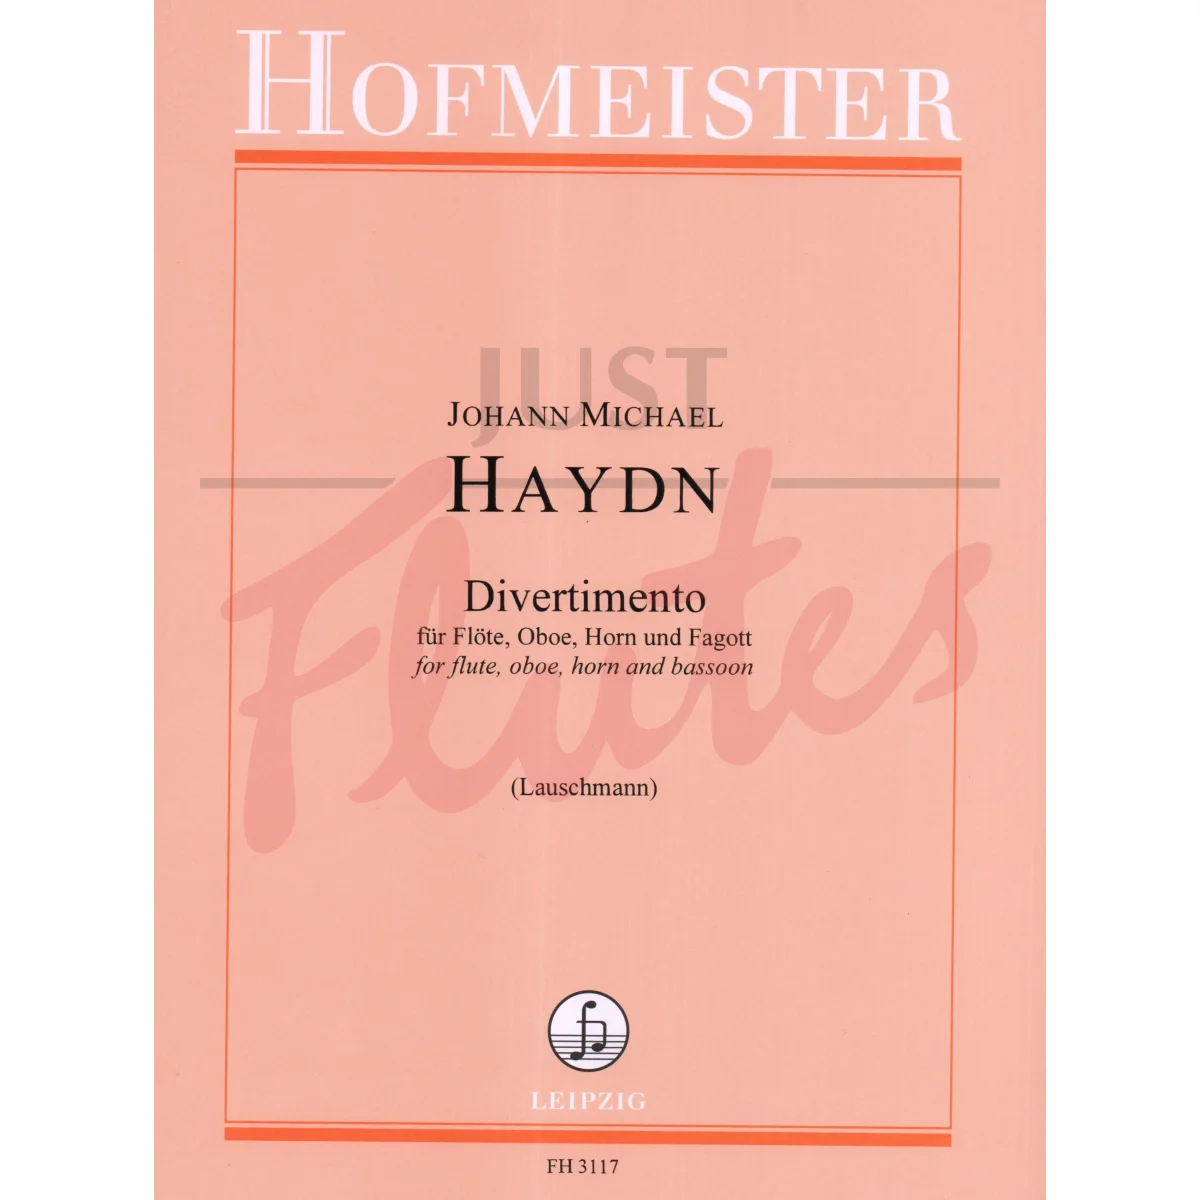 Divertimento for Flute, Oboe, Horn and Bassoon